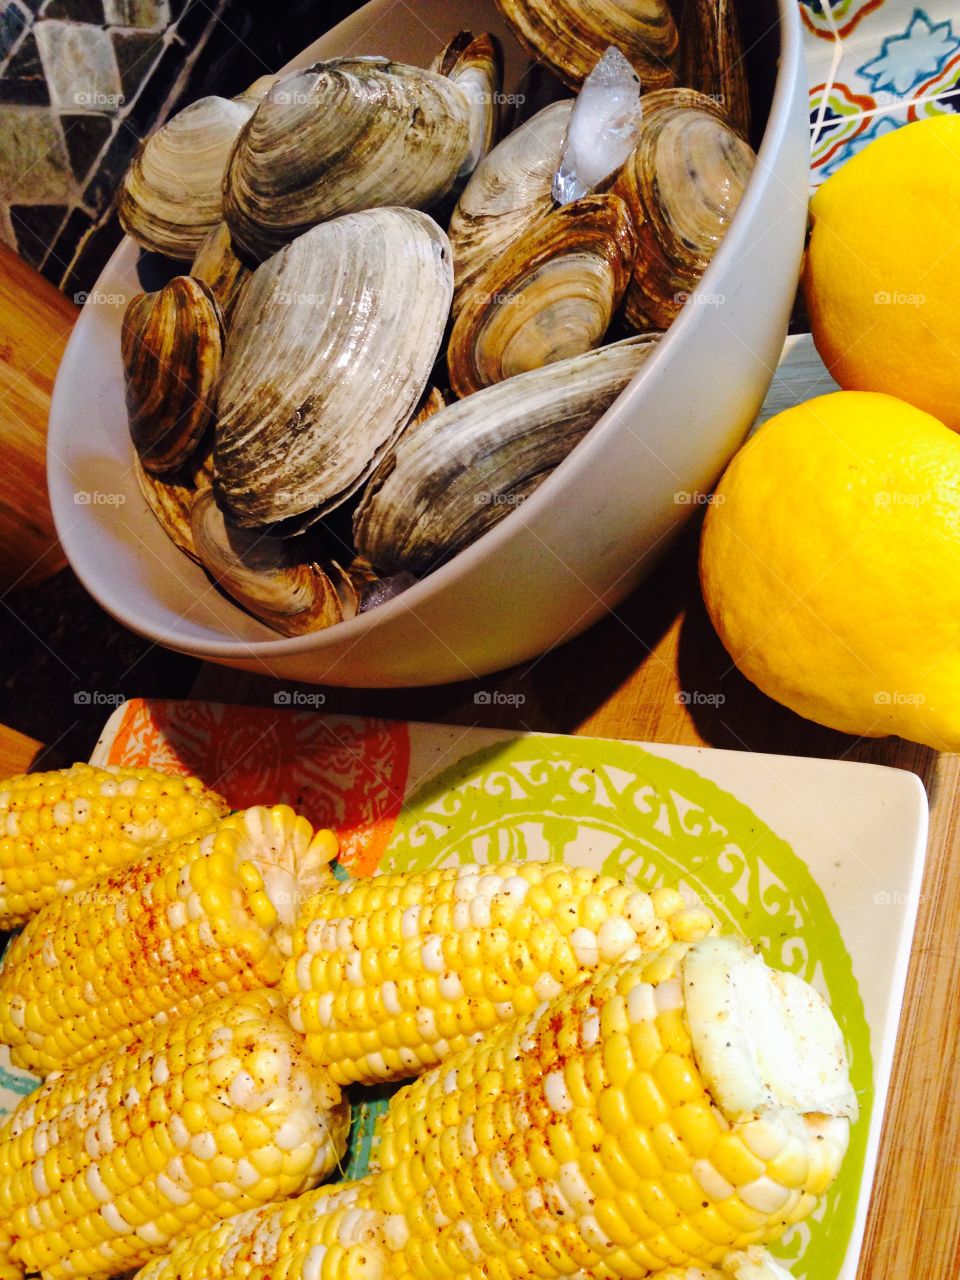 Lemon & corn bright as the sun . Fresh lemon and sweet corn are ready to compliment any seafood